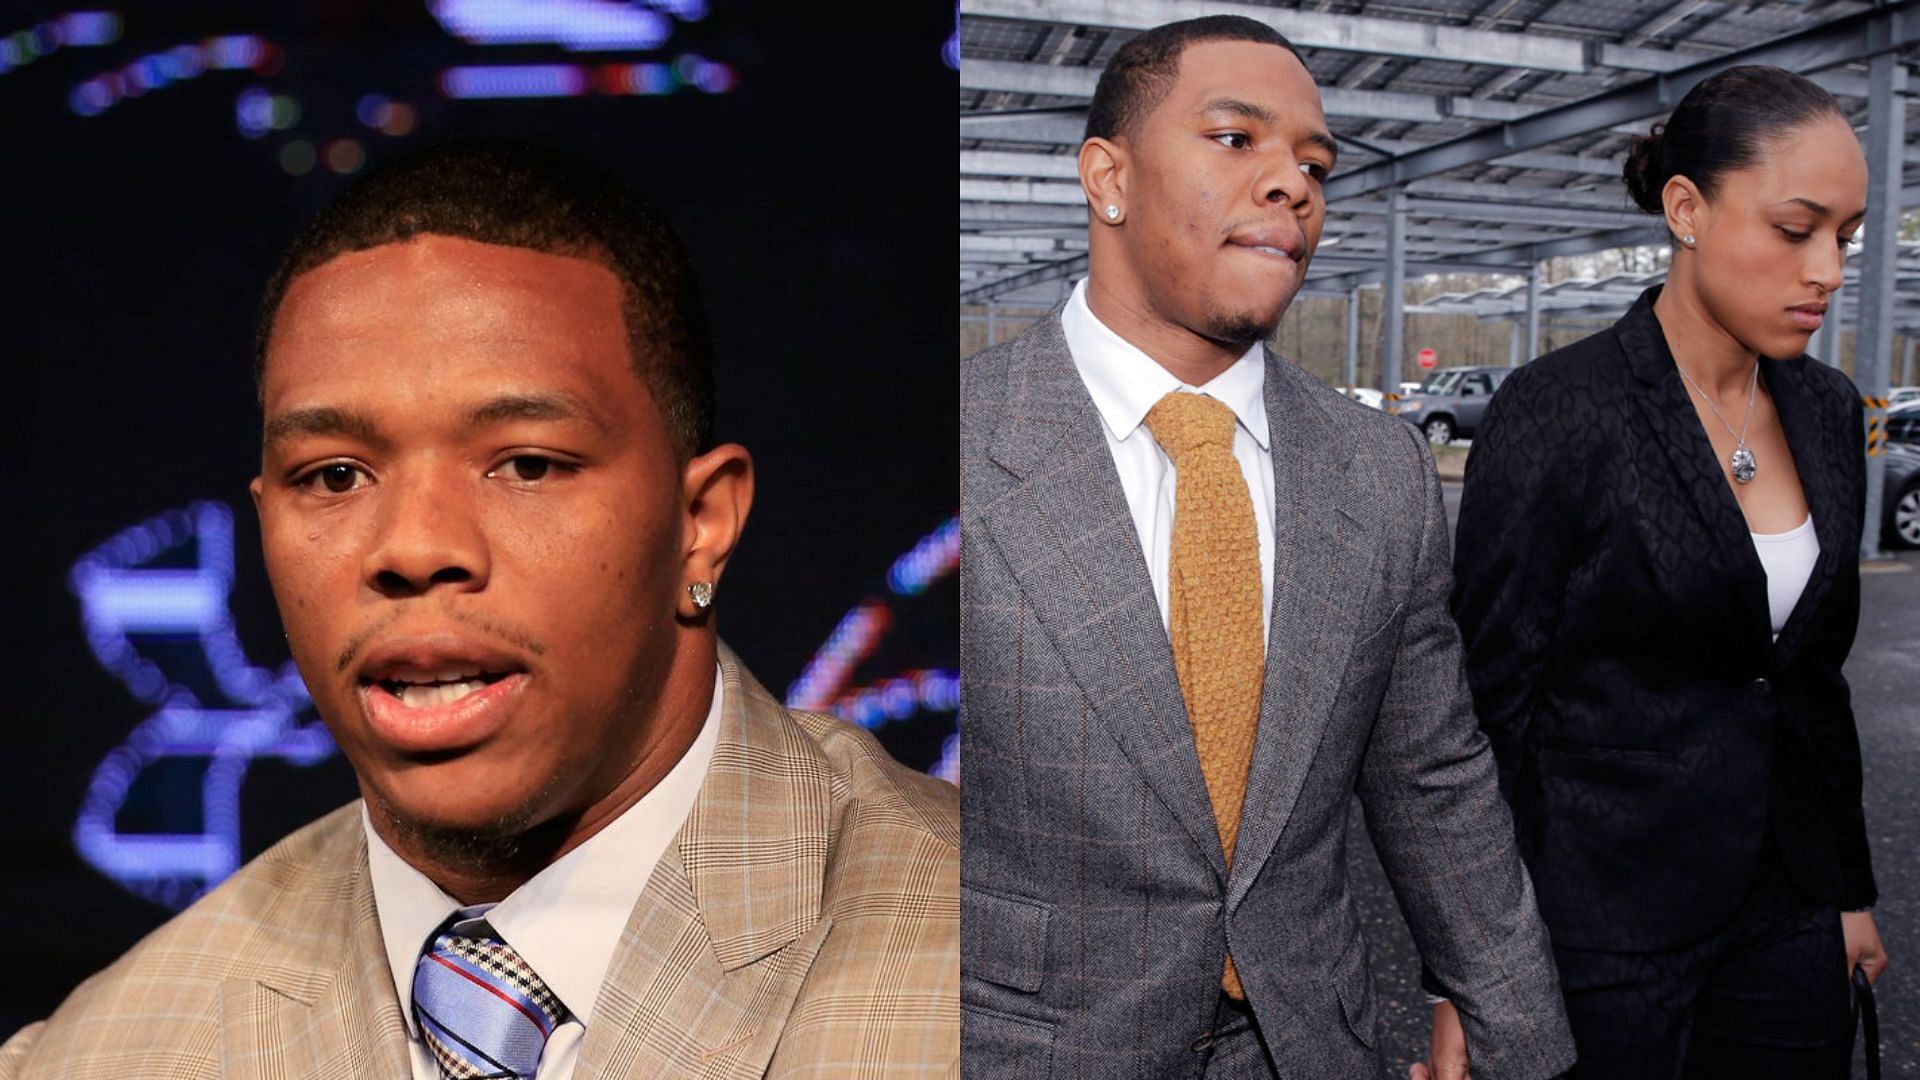 Did former Ravens RB Ray Rice assault his then-fiancee Janay in 2014?